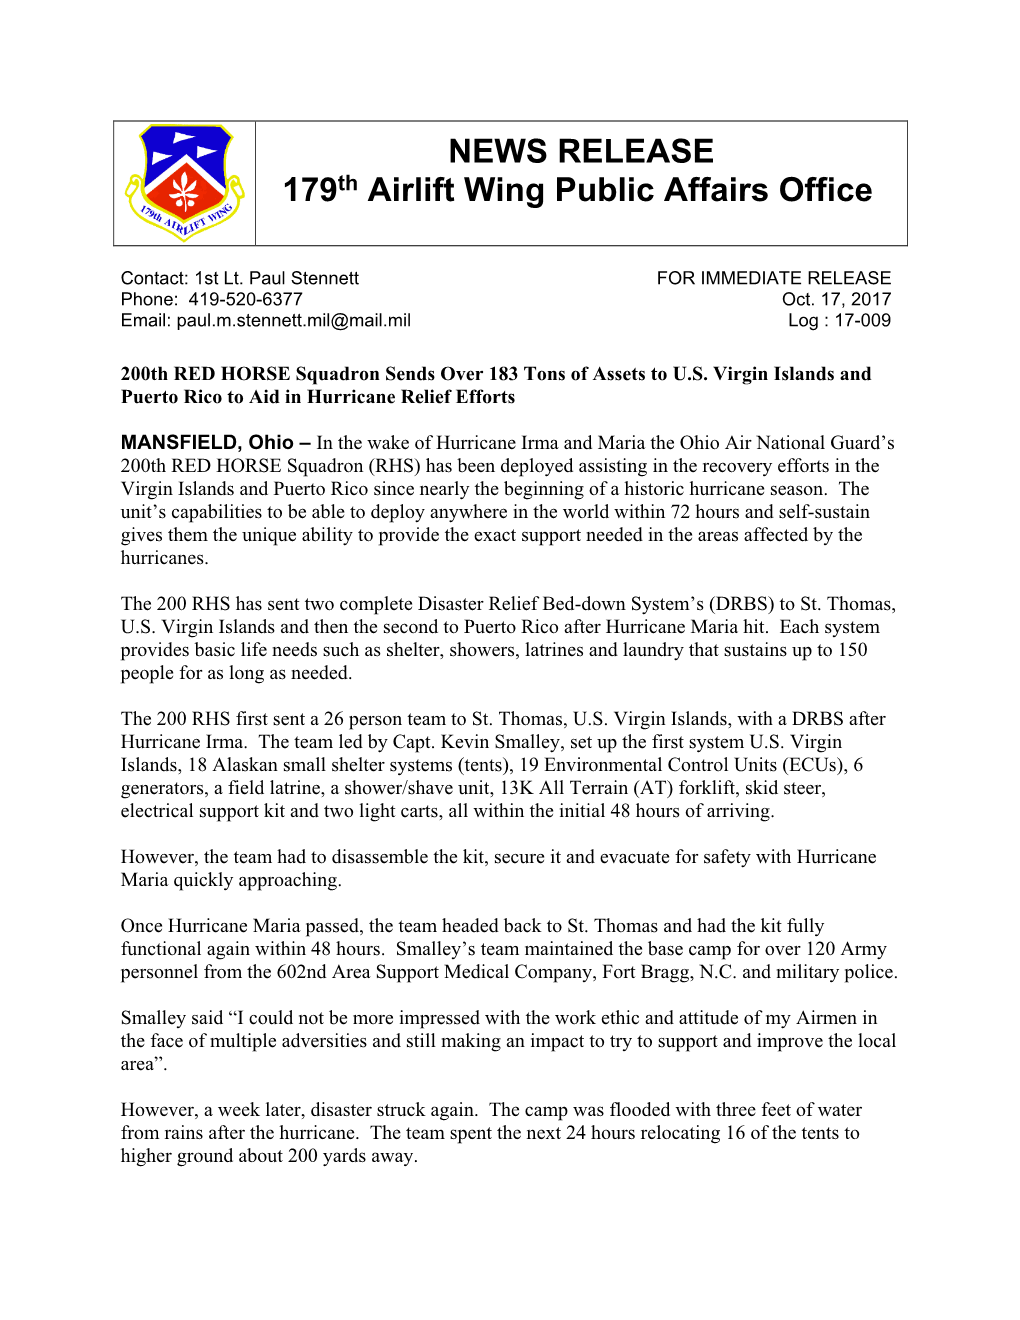 NEWS RELEASE 179Th Airlift Wing Public Affairs Office